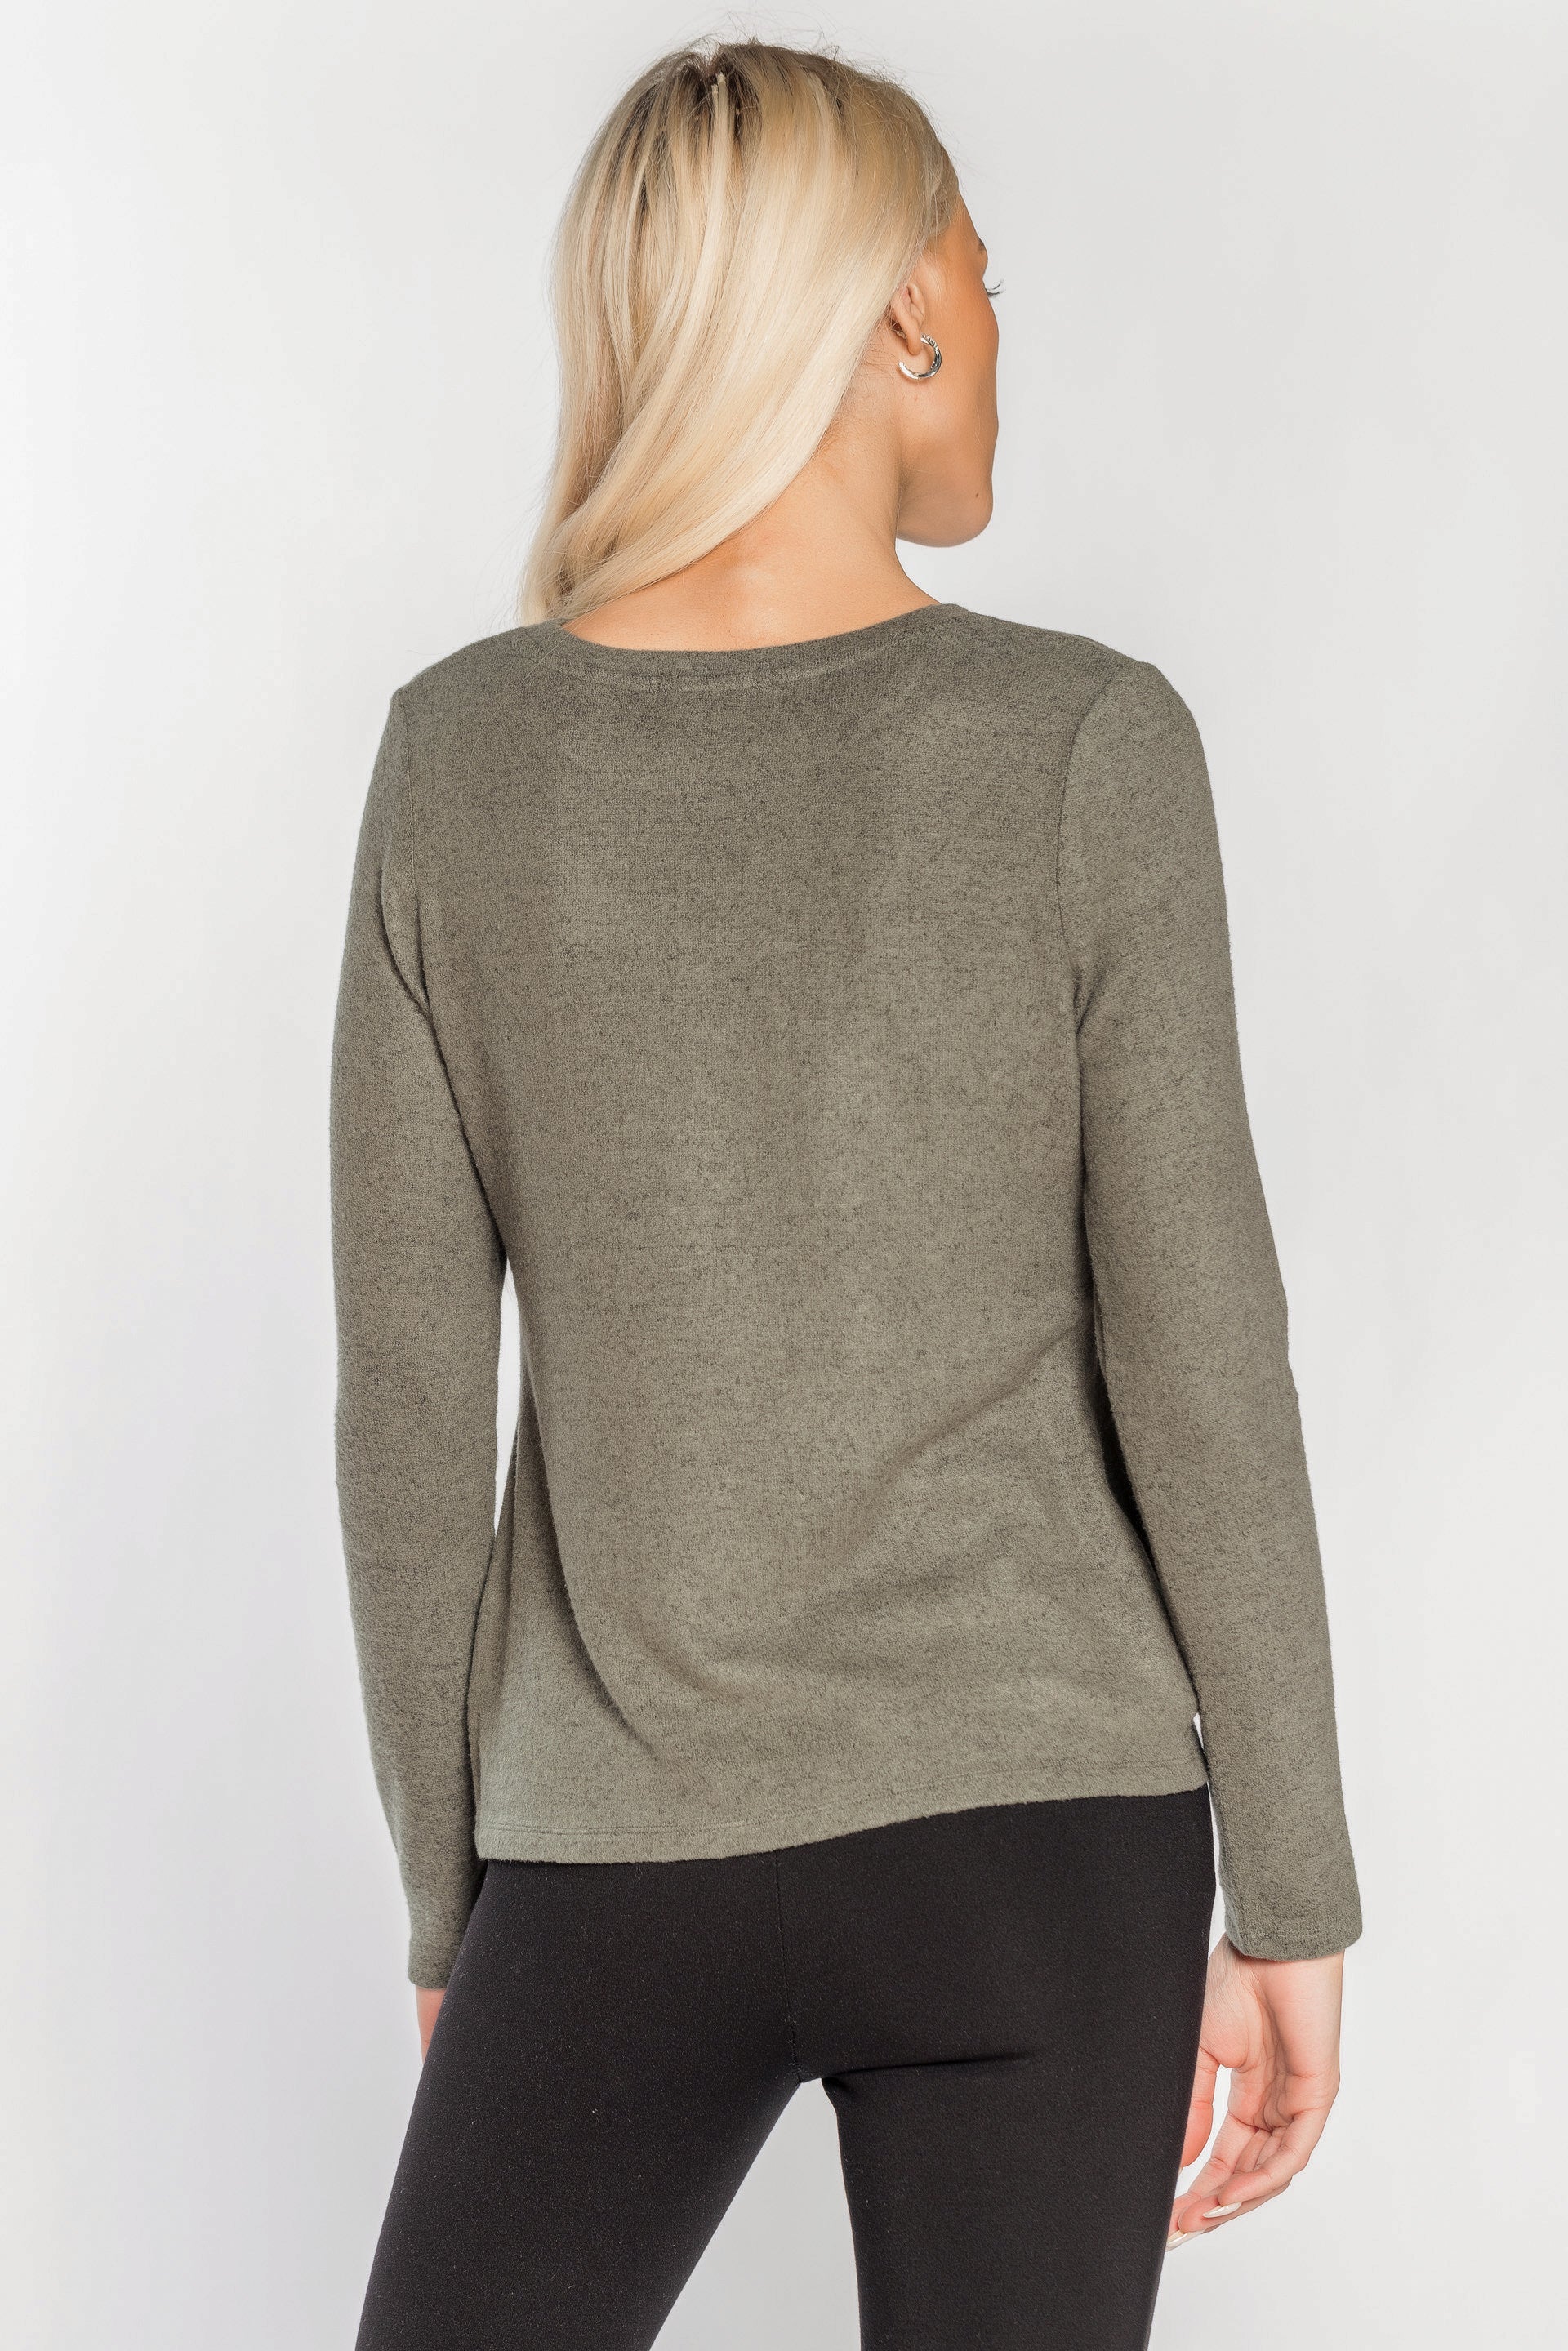 SuperSoft Long Sleeve Sweater